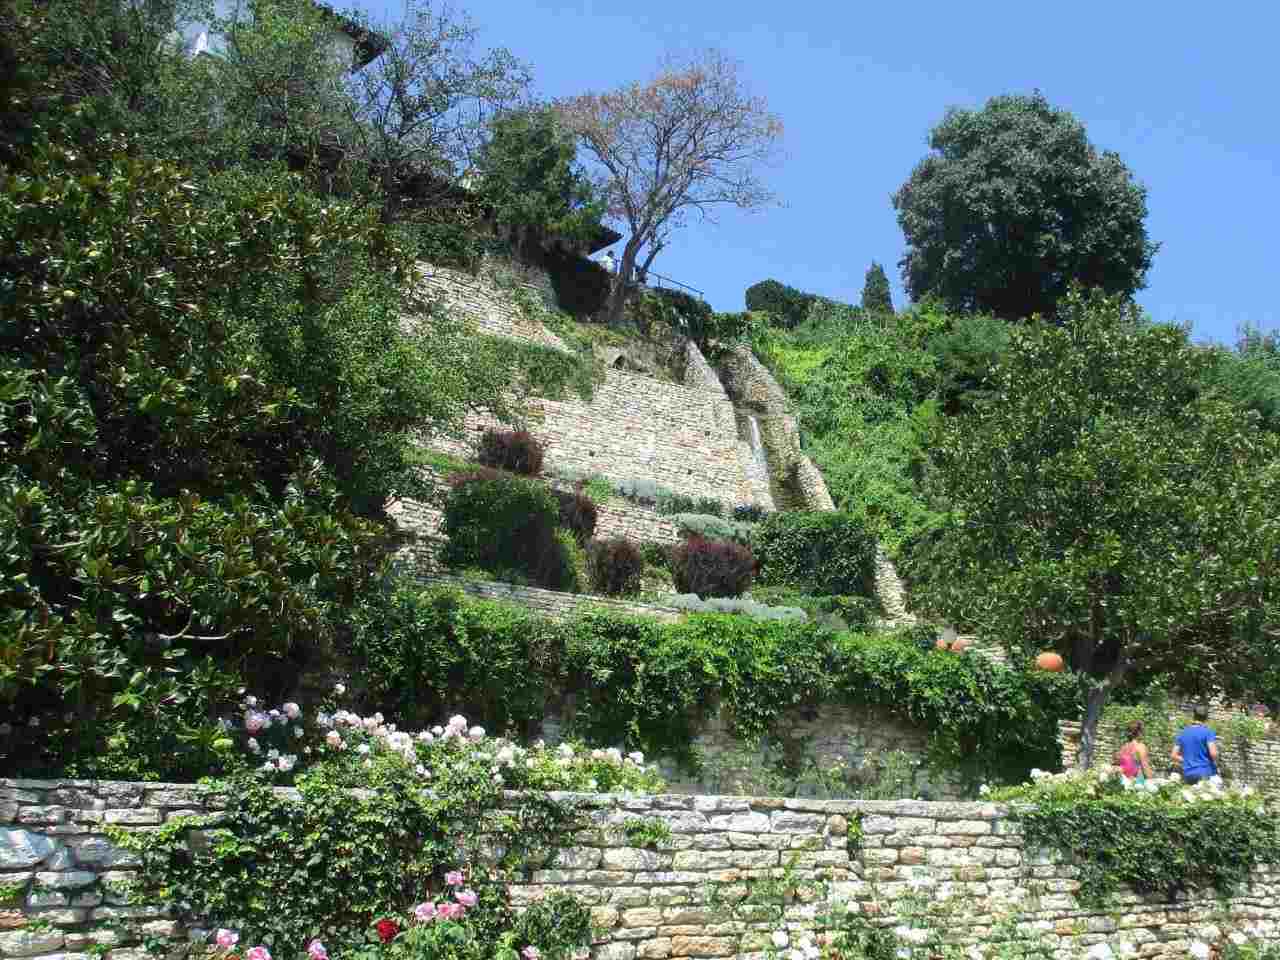 View up the cliff face to the Balchik gardens